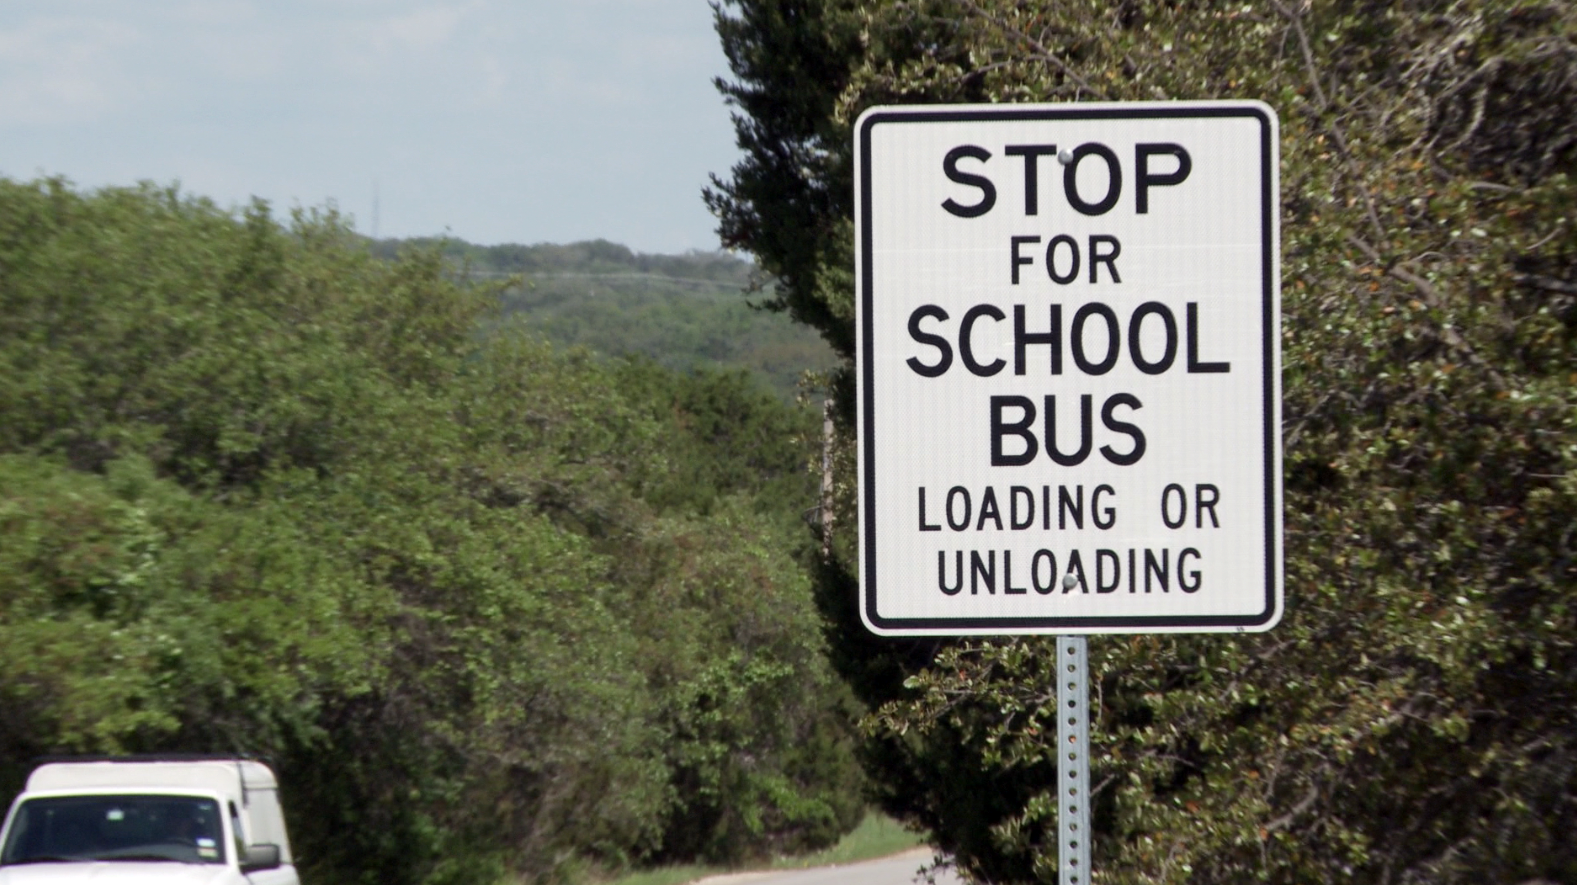 Bus stop loading sign